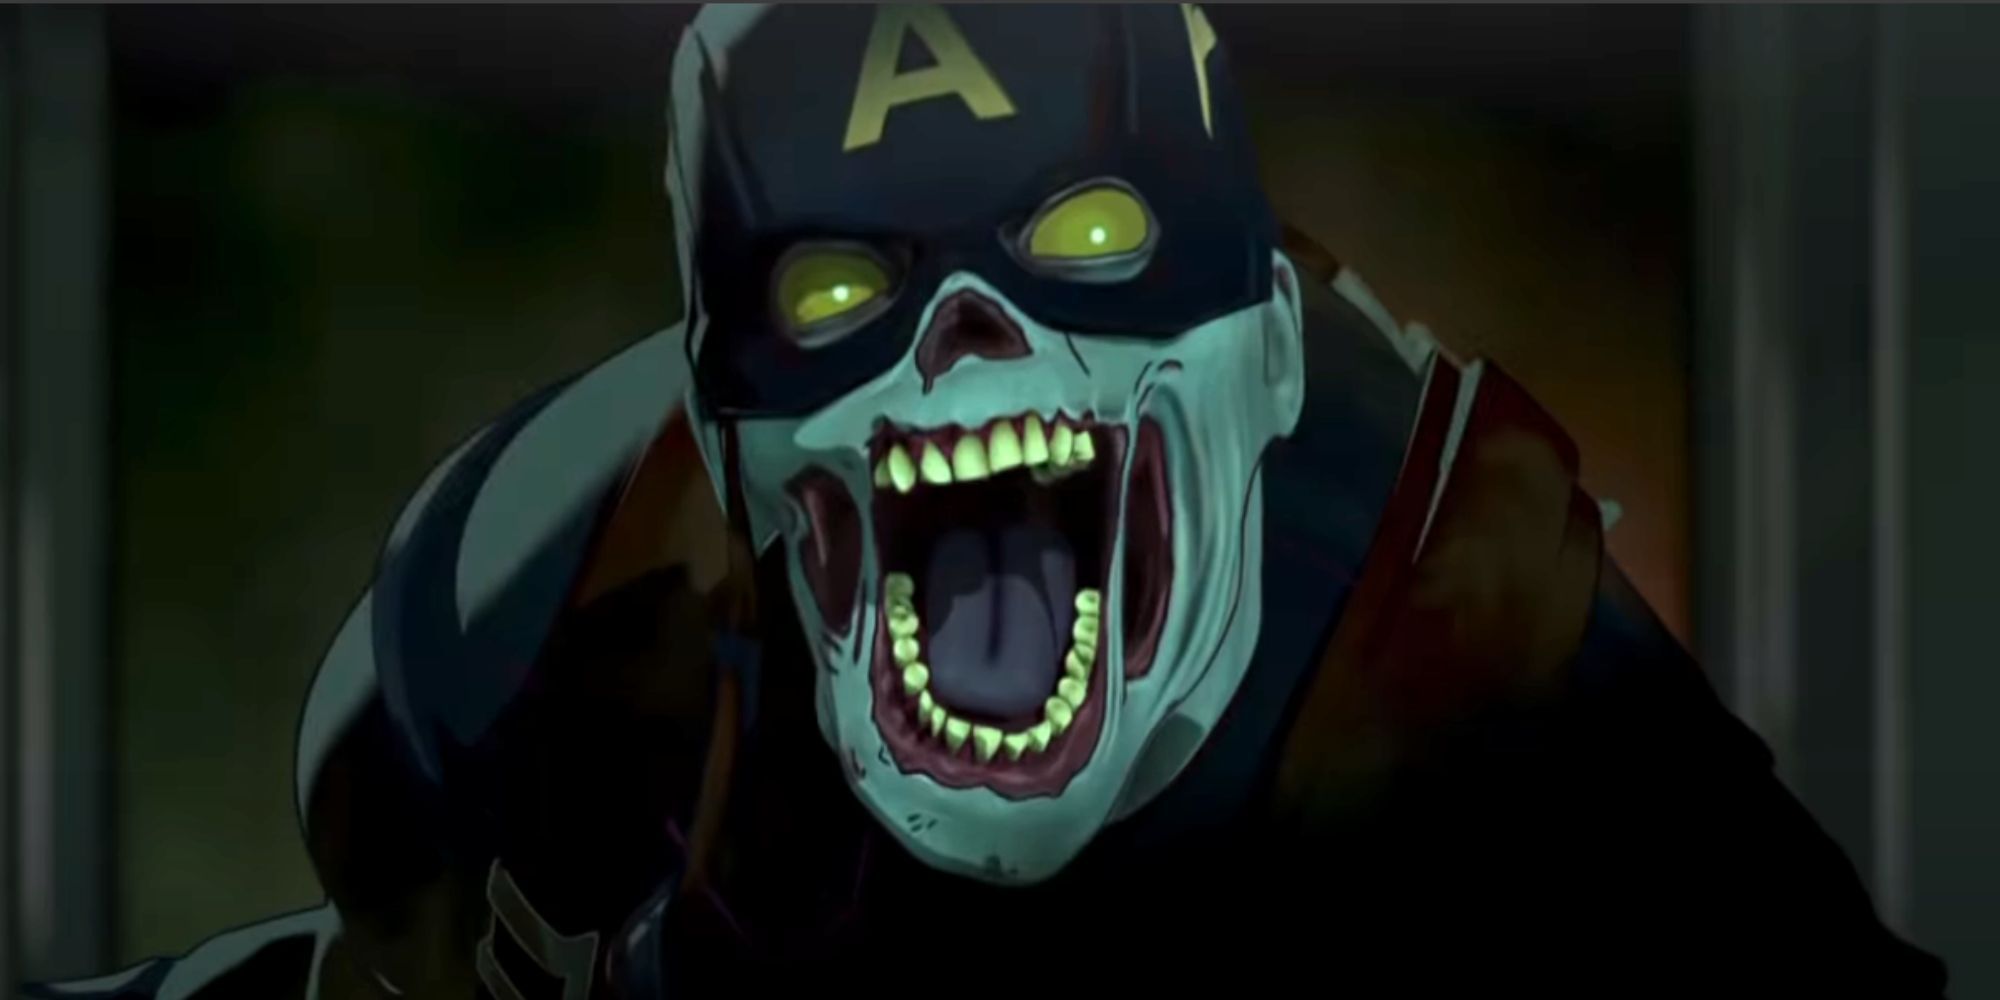 Captain America as a zombie from What If...?